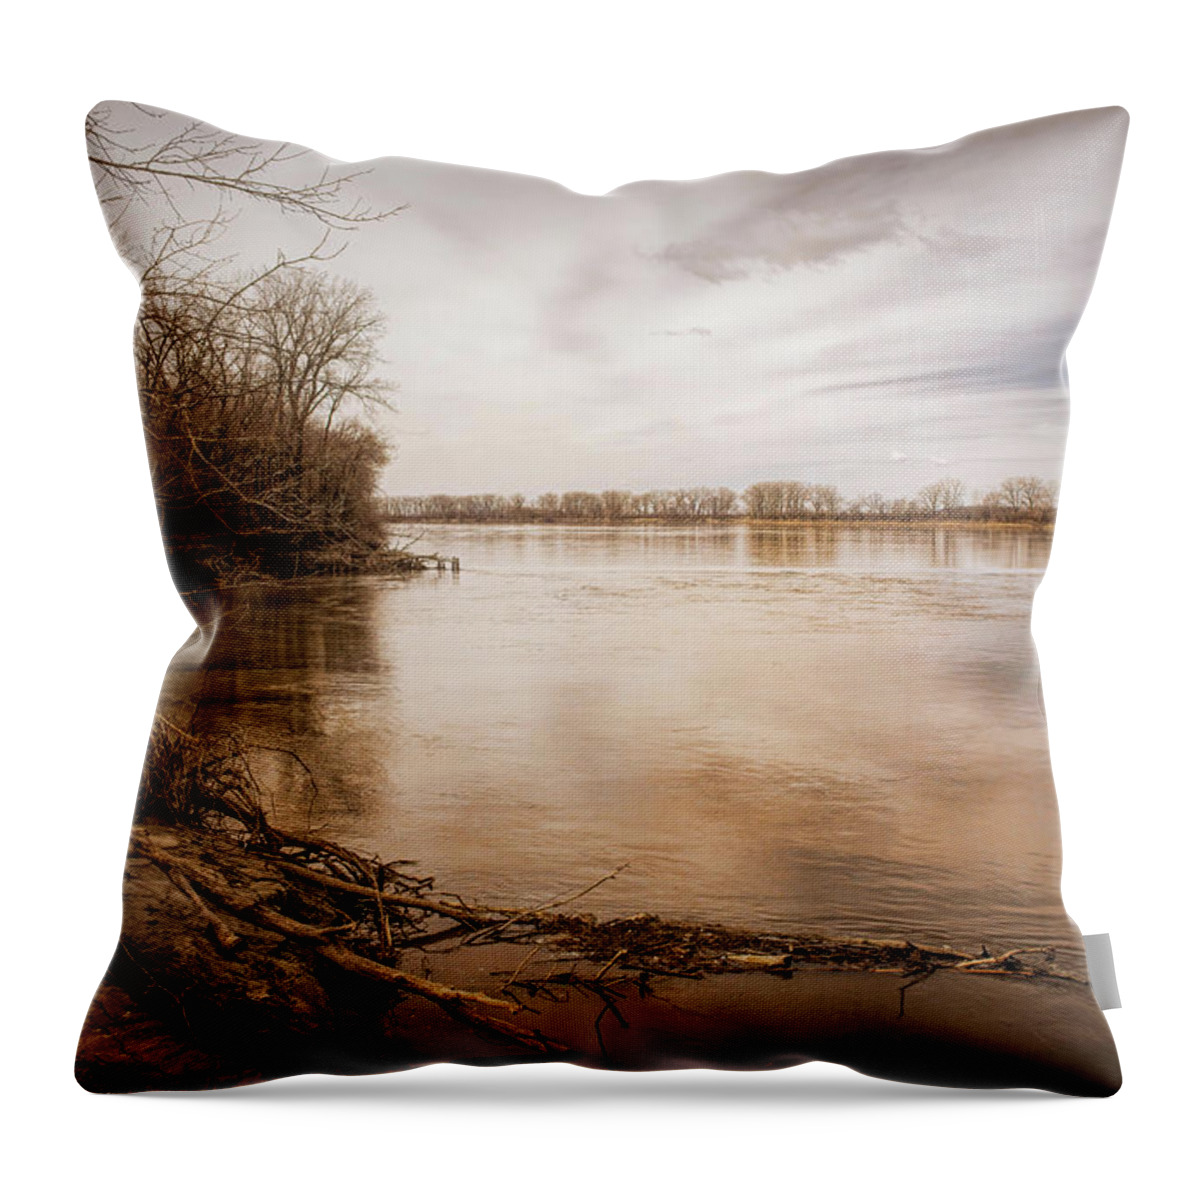 Landscape Throw Pillow featuring the photograph The Muddy Missouri by Linda Shannon Morgan